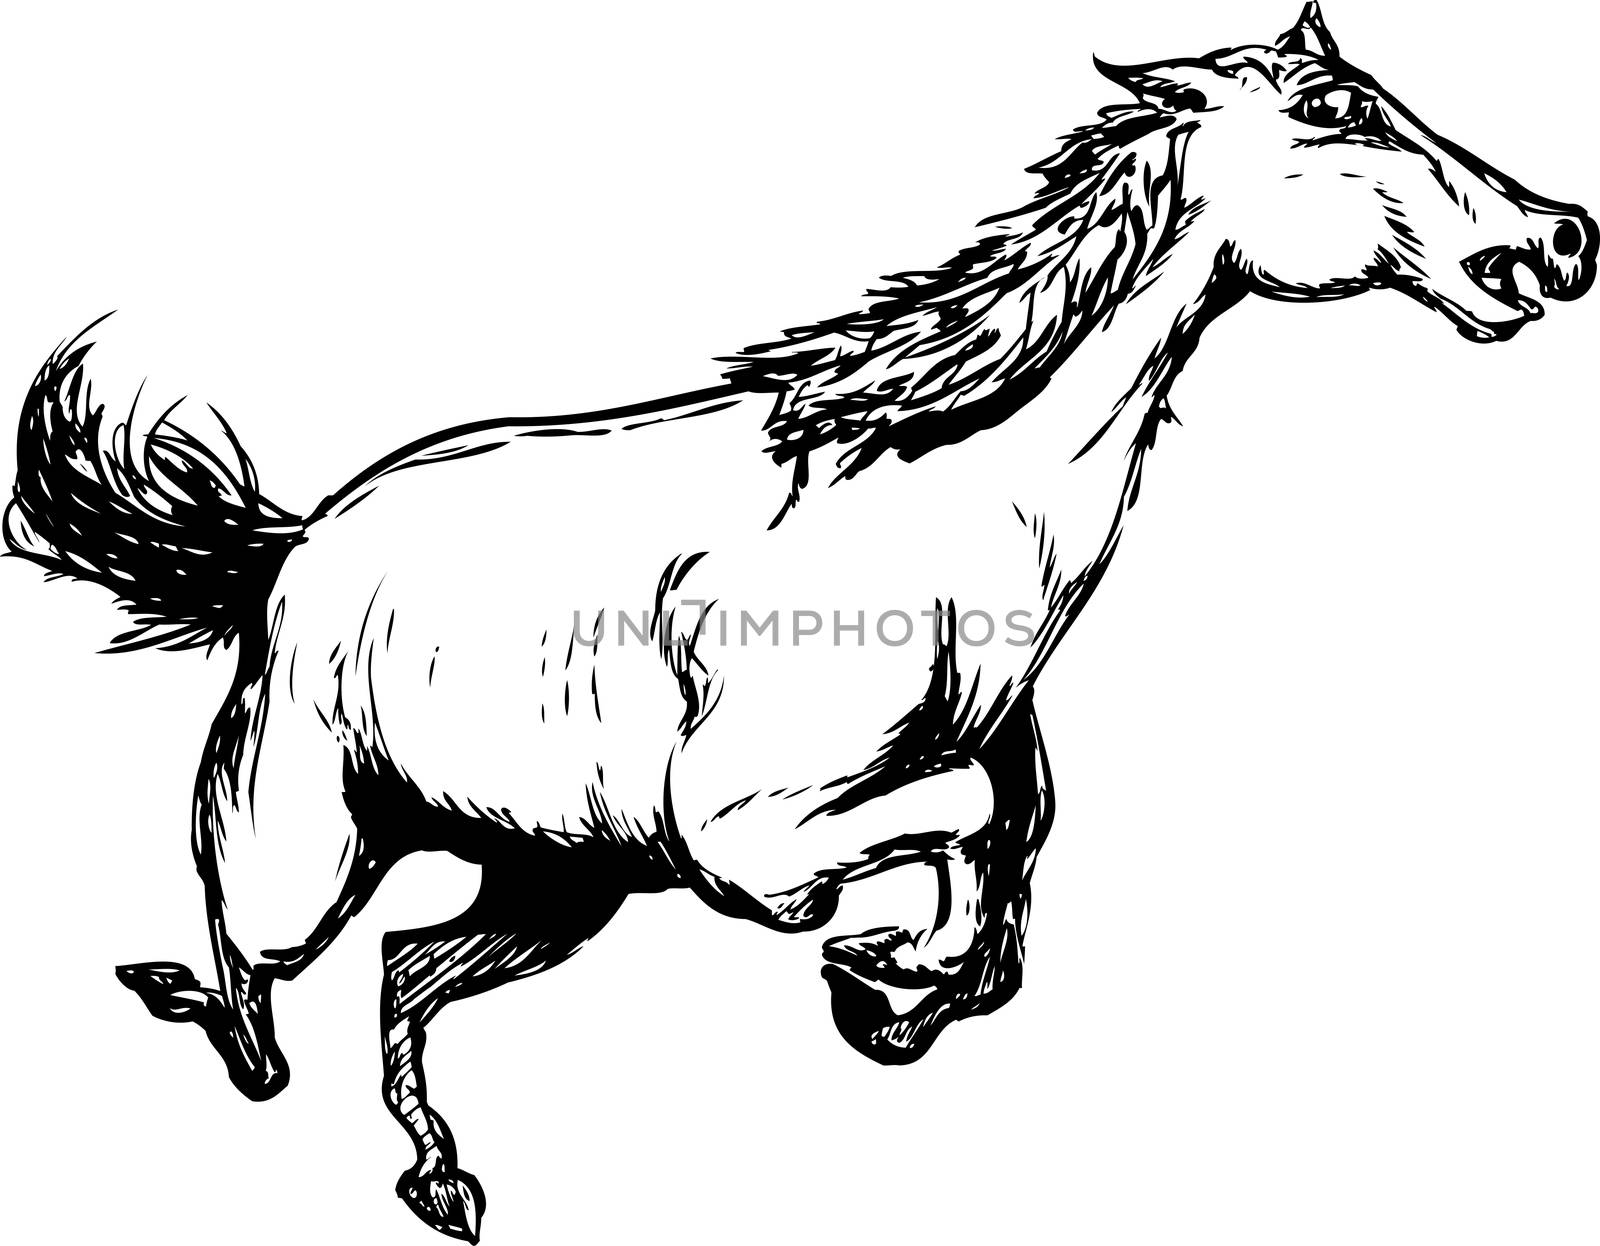 Outline illustration of single wild horse galloping over isolated white background